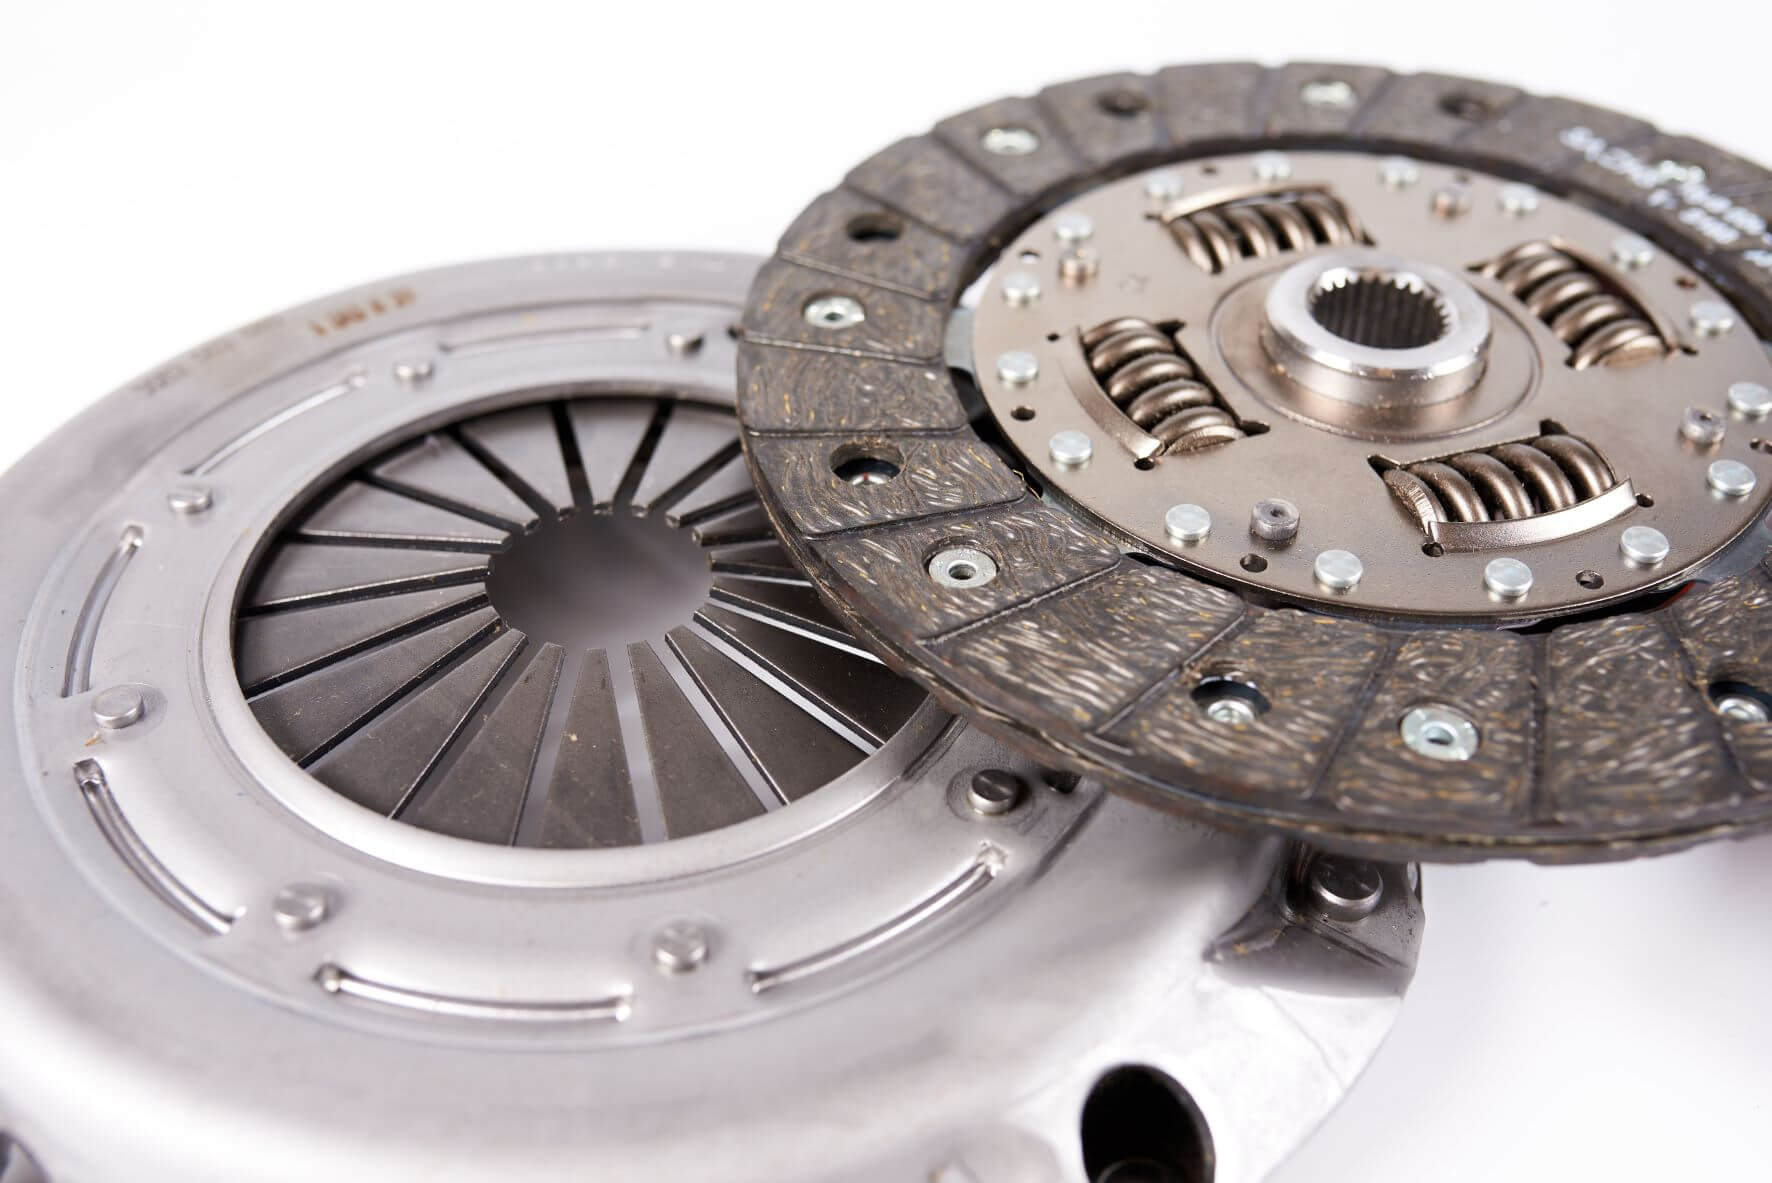 Clutch Pressure Plate Failure And The Associated Symptoms To Look Out For